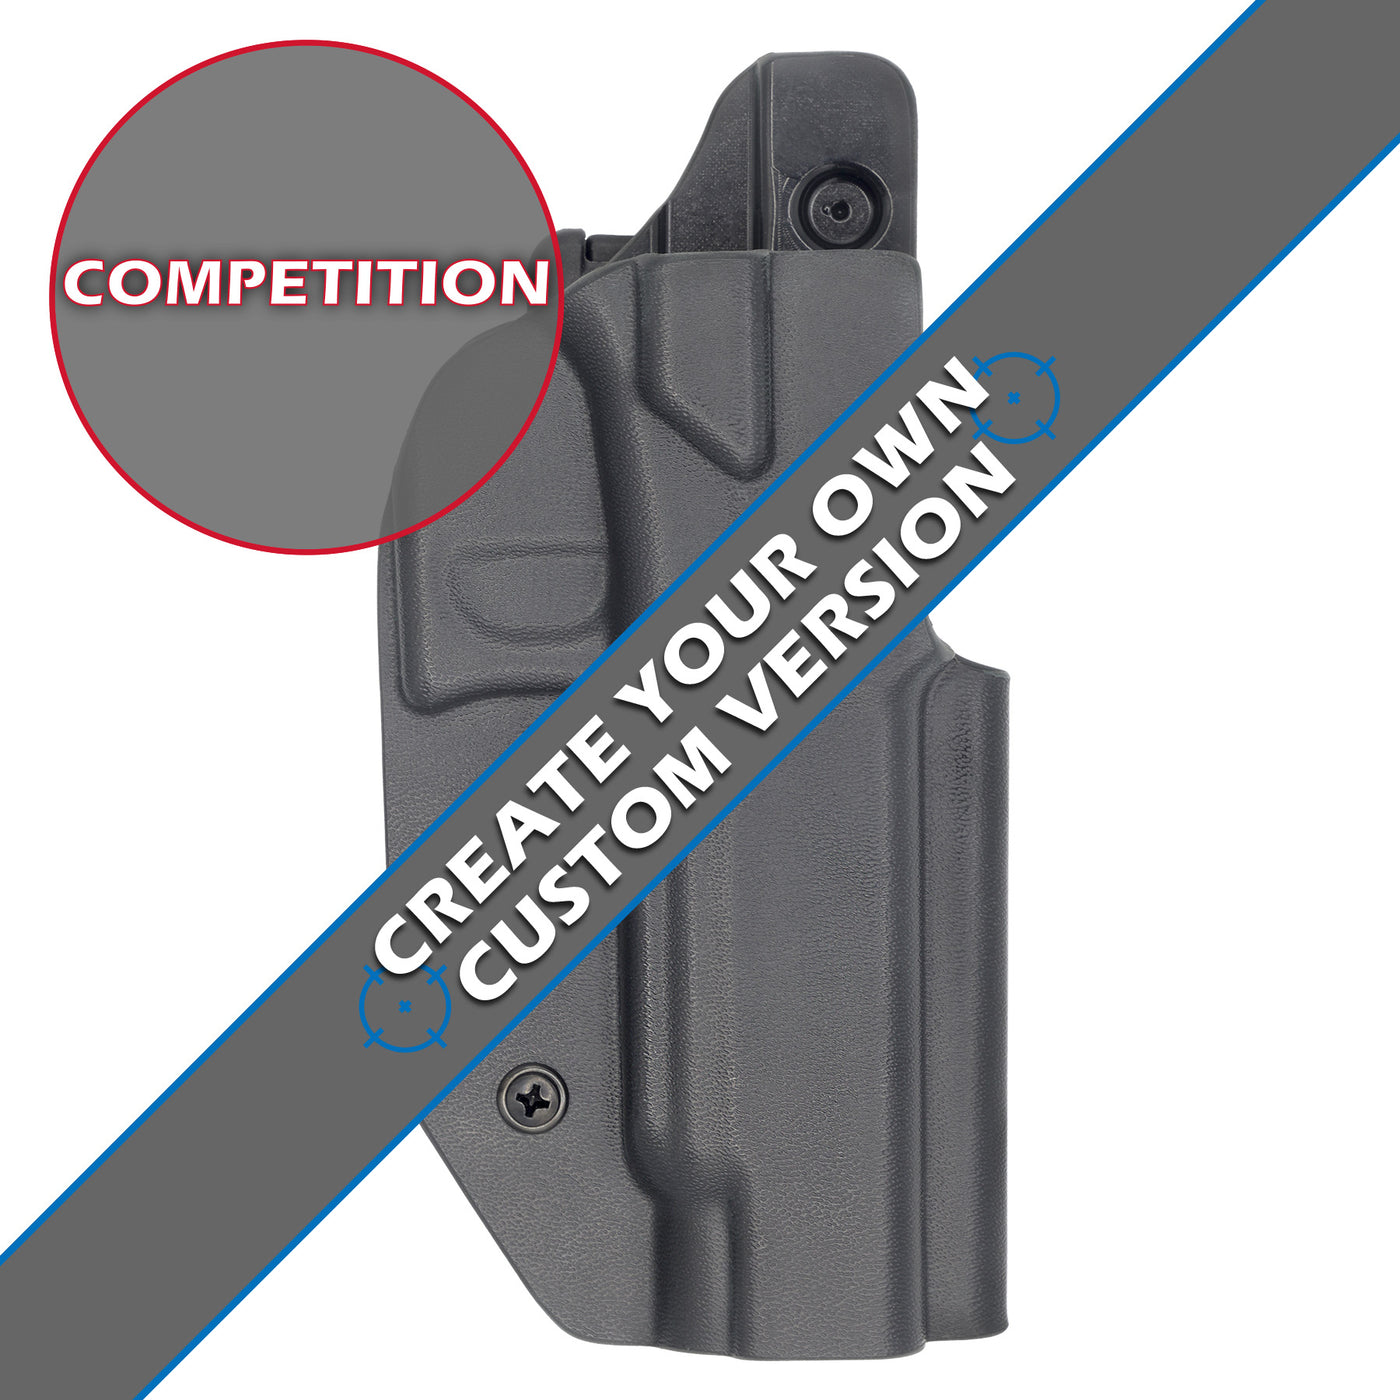 C&G Holsters custom COMPETITION kydex holster